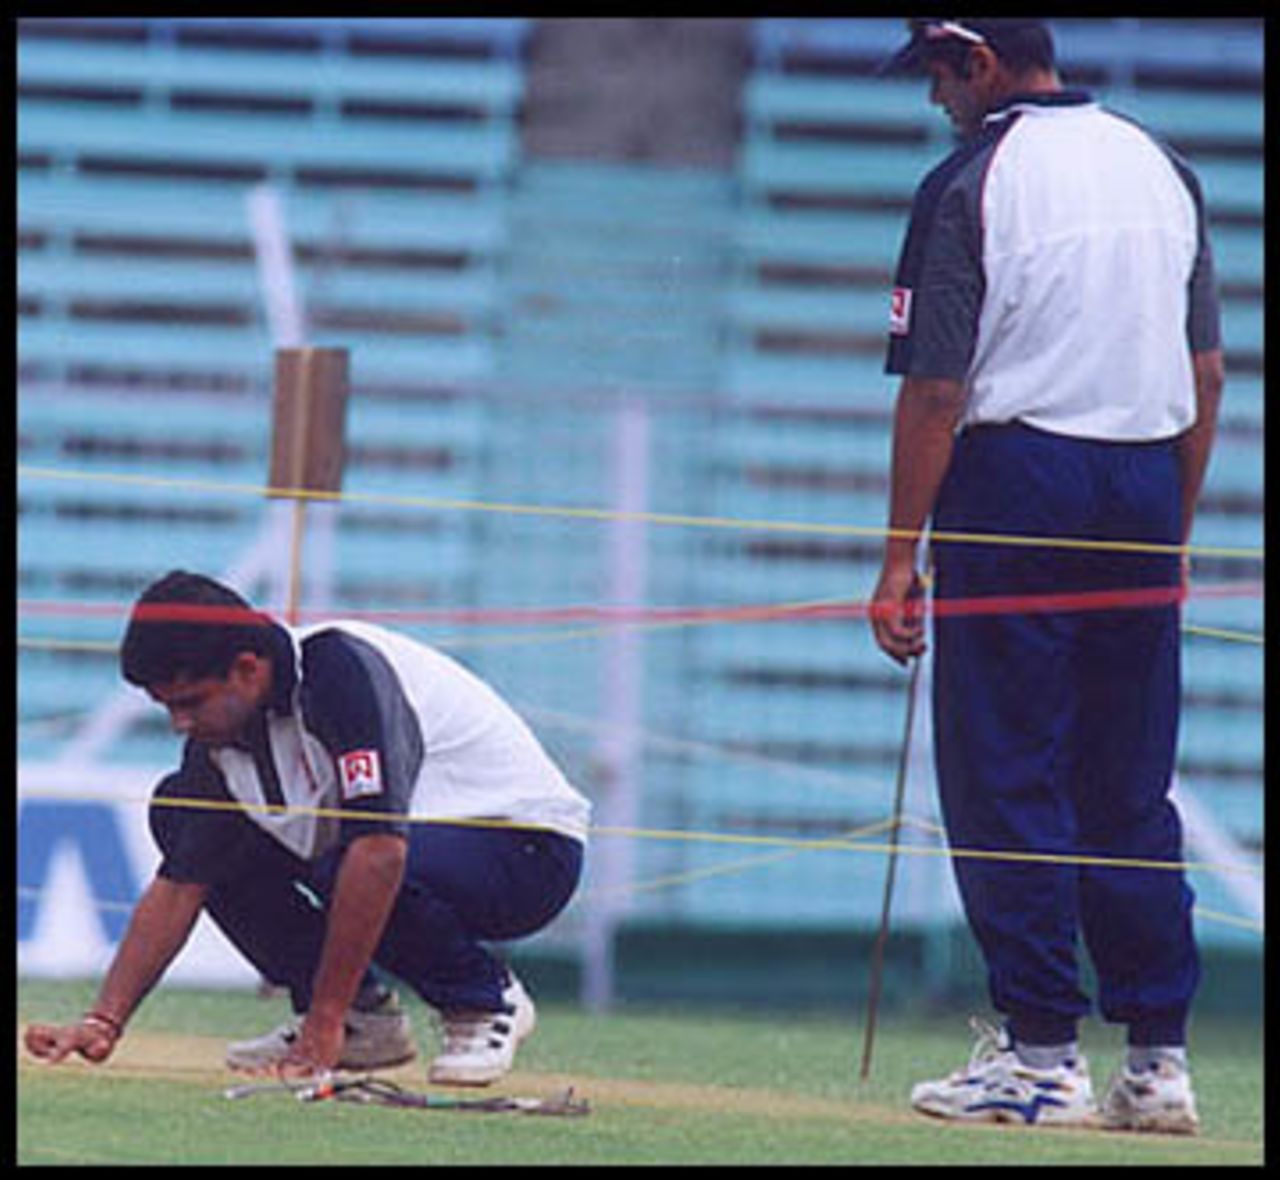 Ganguly closely examining the playing surface at Wankhede Stadium, 26 Feb 2001.